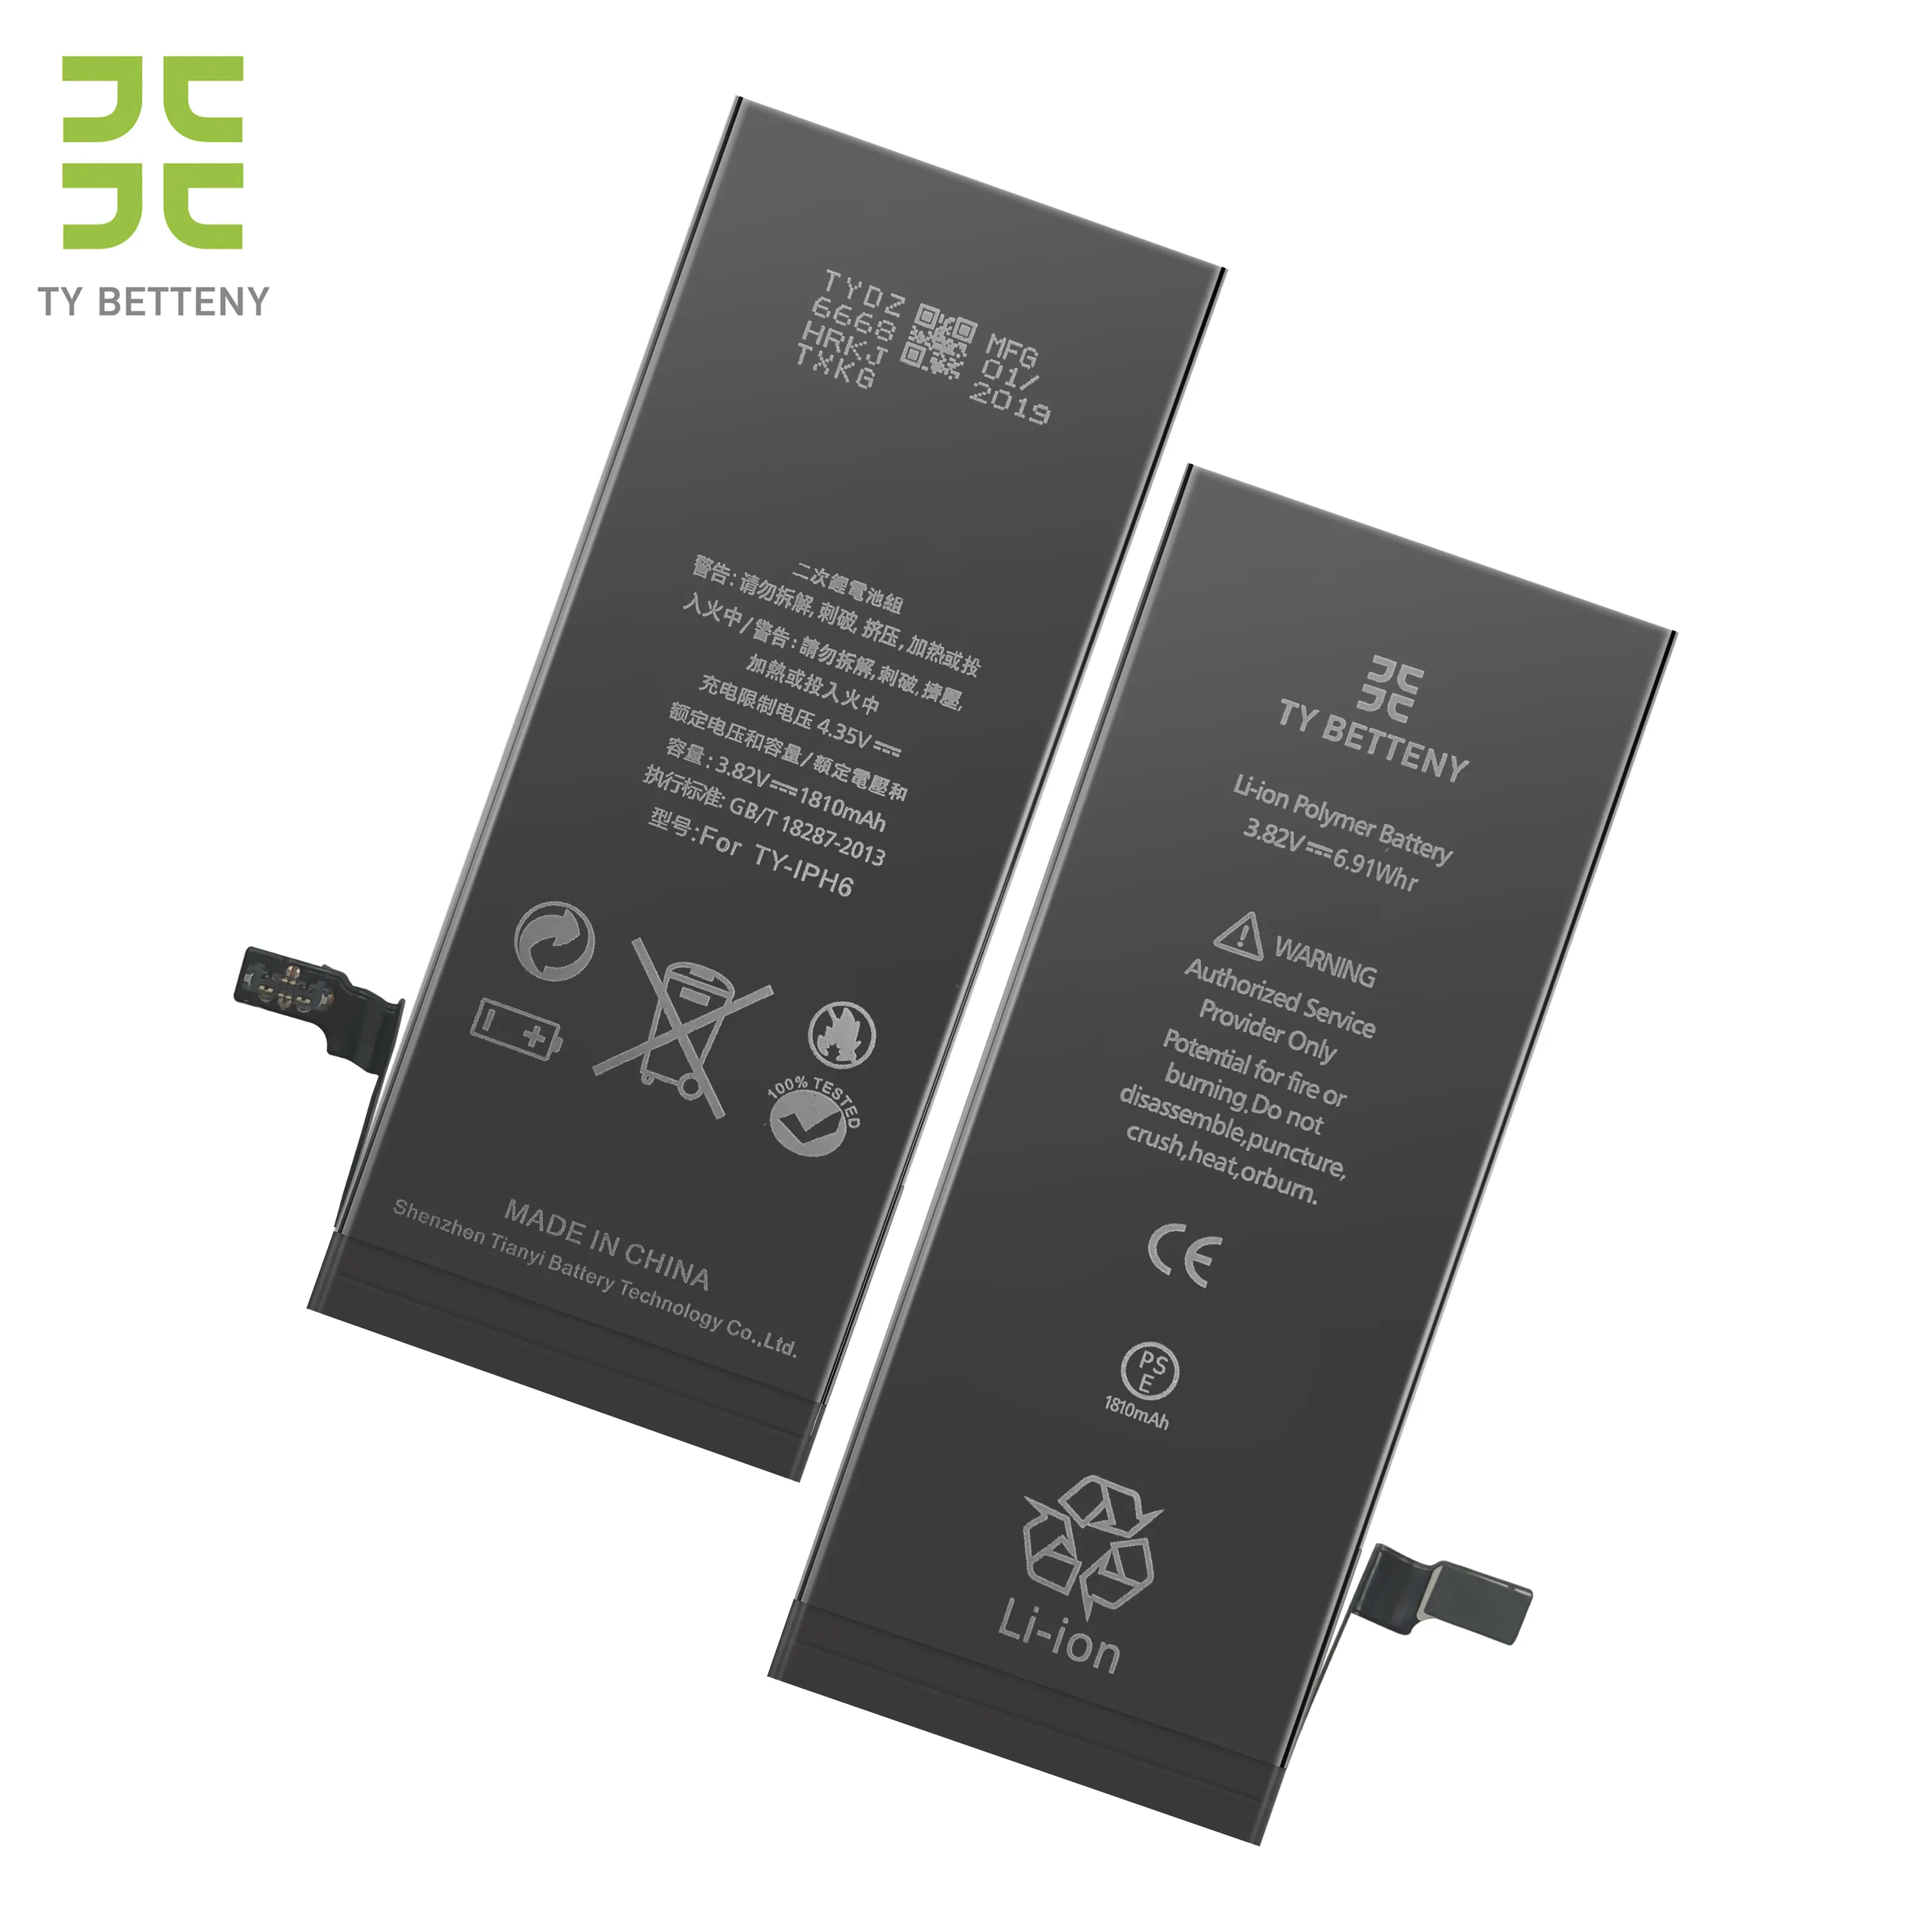 100% full Capacity gb t18287 2013 phone battery for iphone battery 5 5s se 6 6plus 6s 6sp 7g 7p 8g 8p x